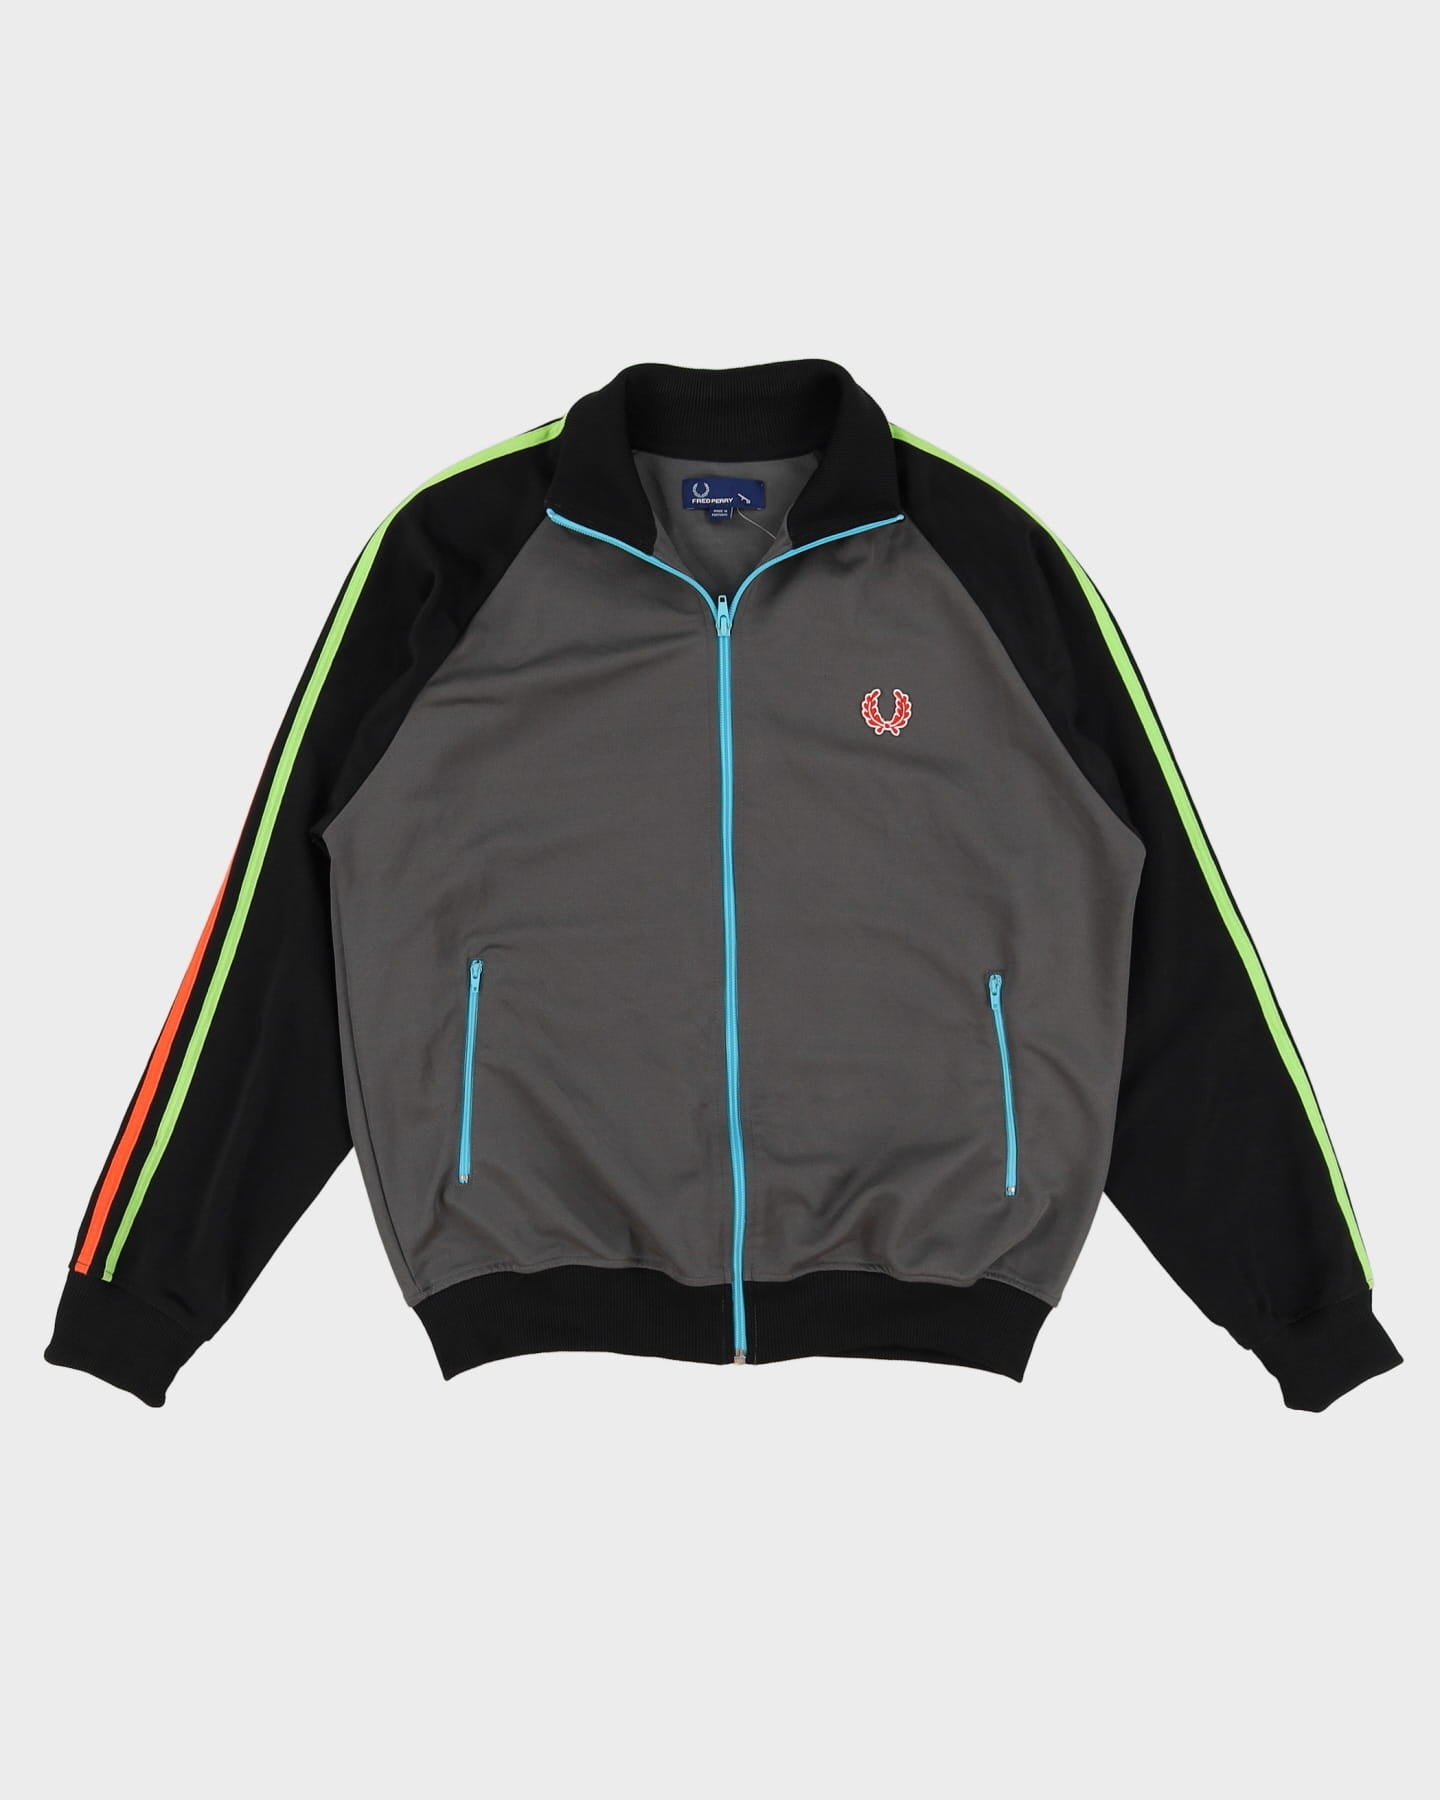 Fred Perry Grey / Black Track Jacket - M